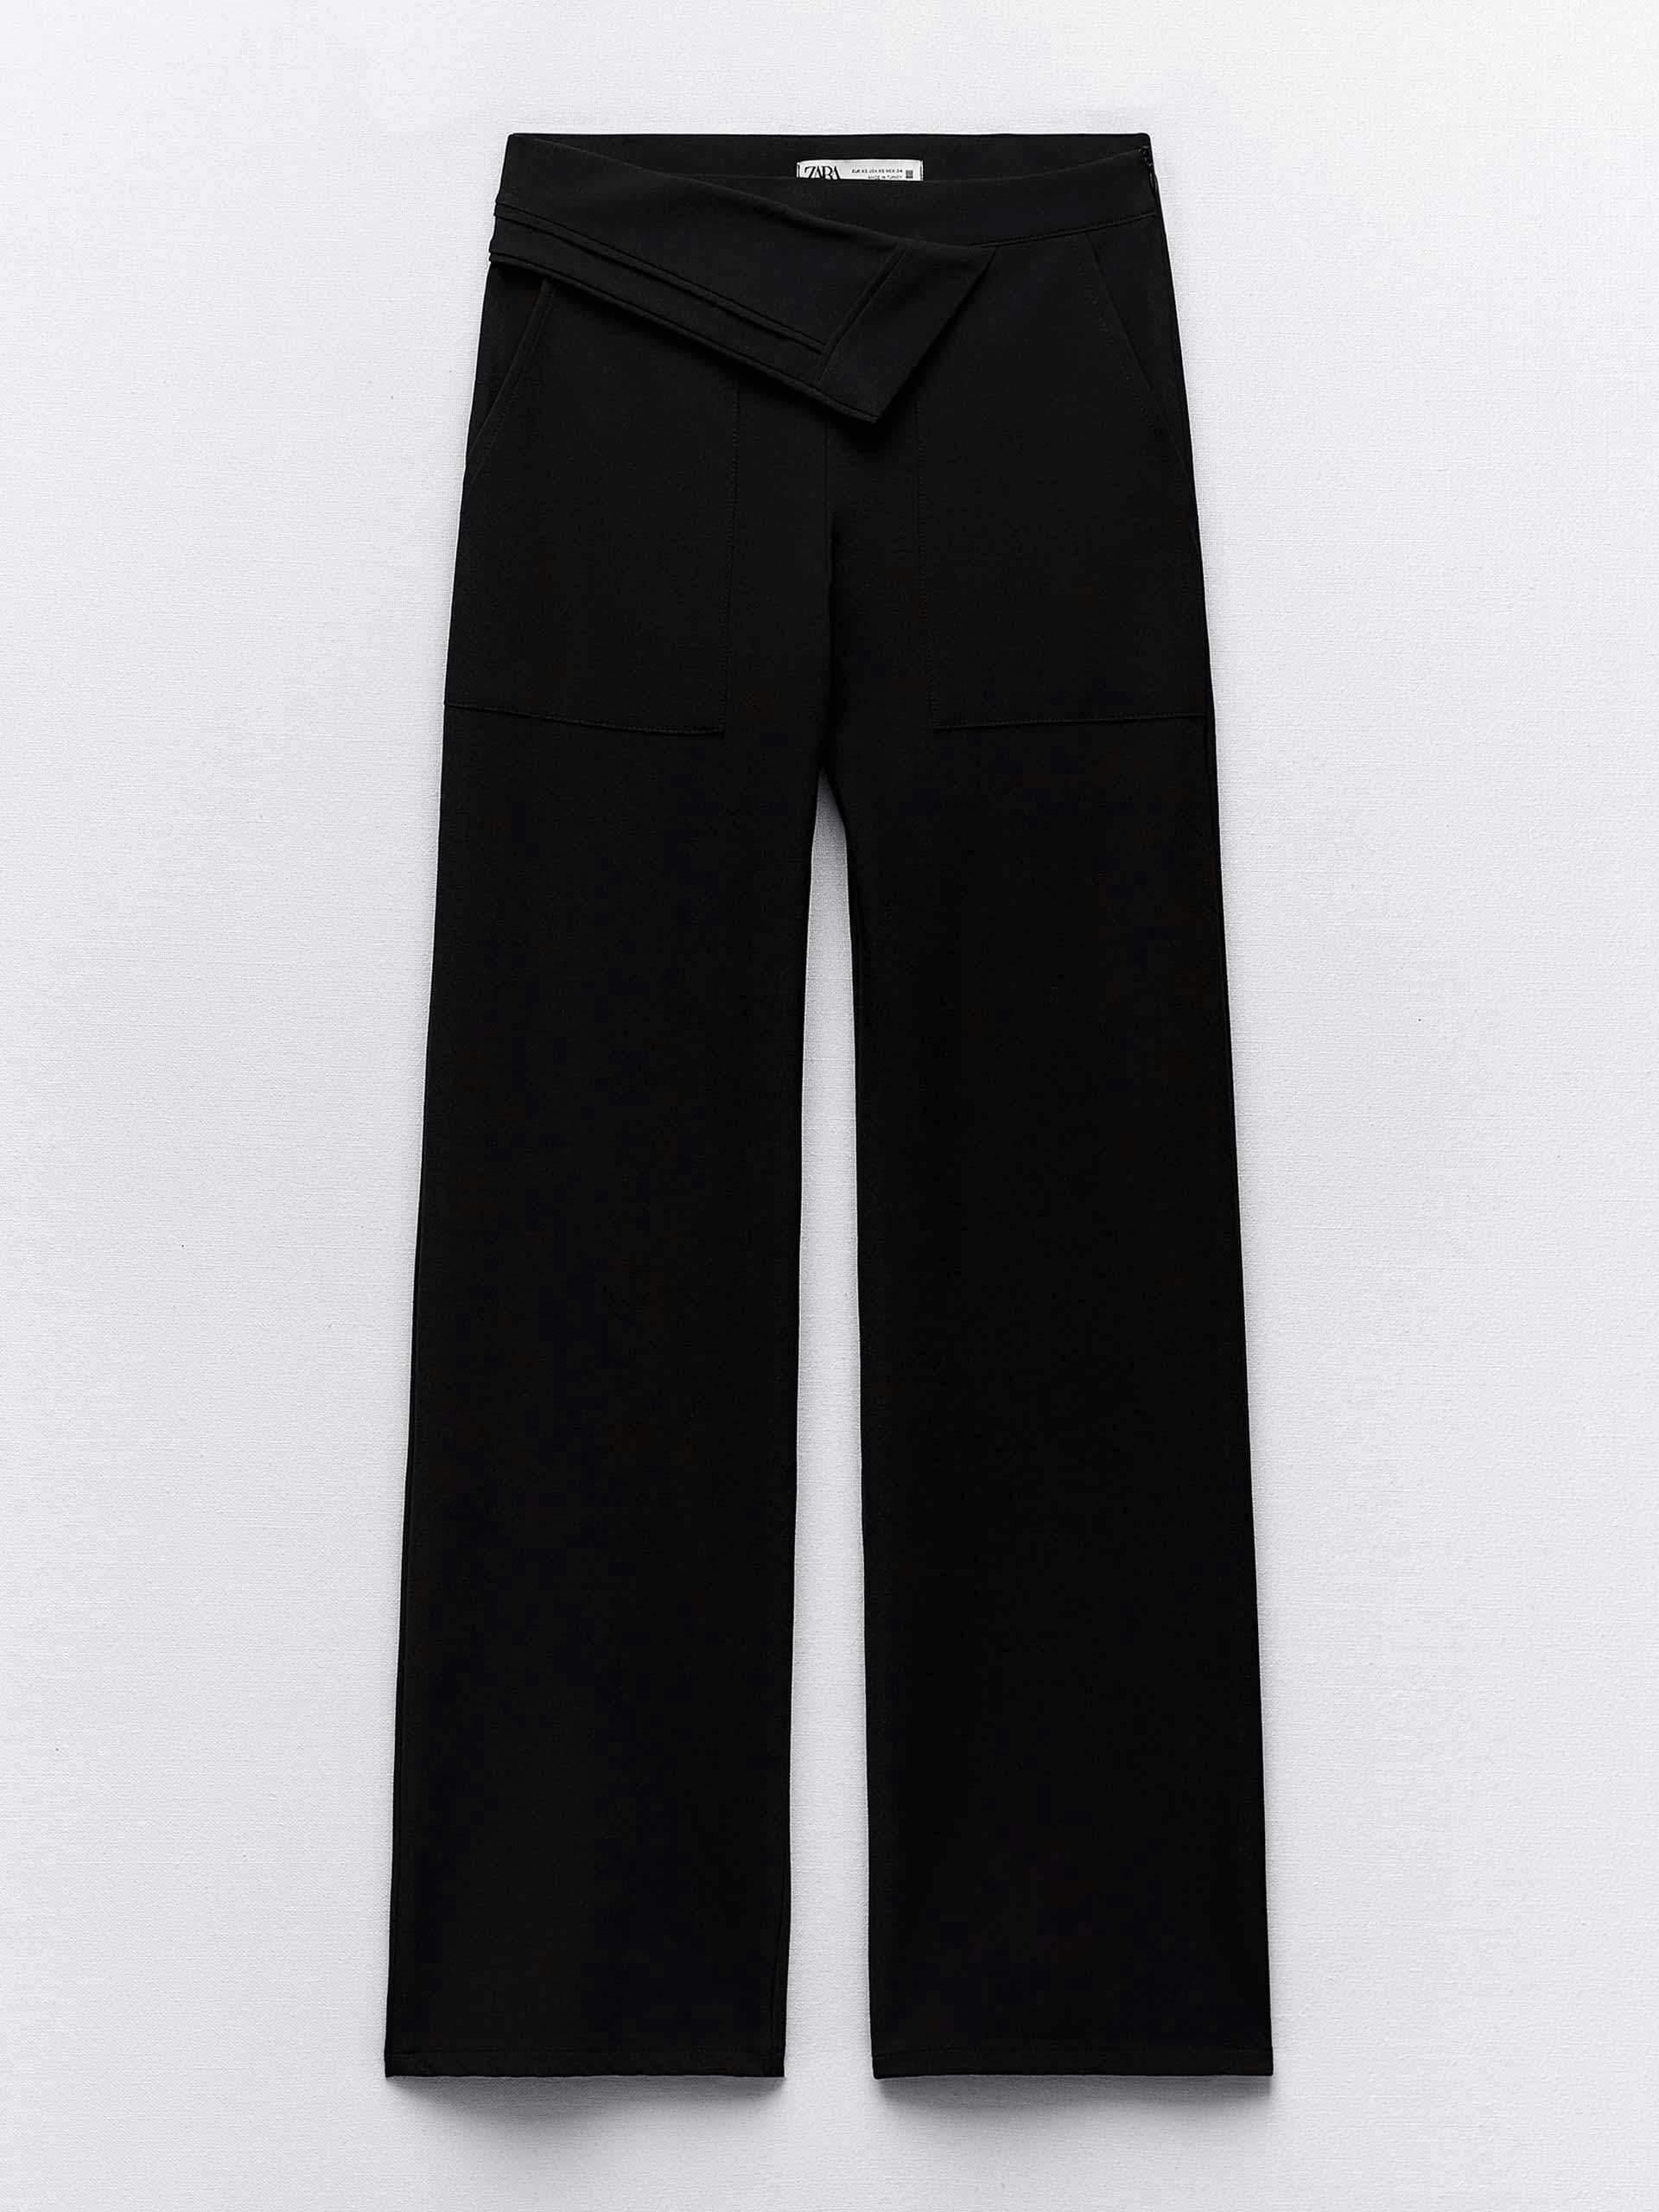 Black trousers with double waist